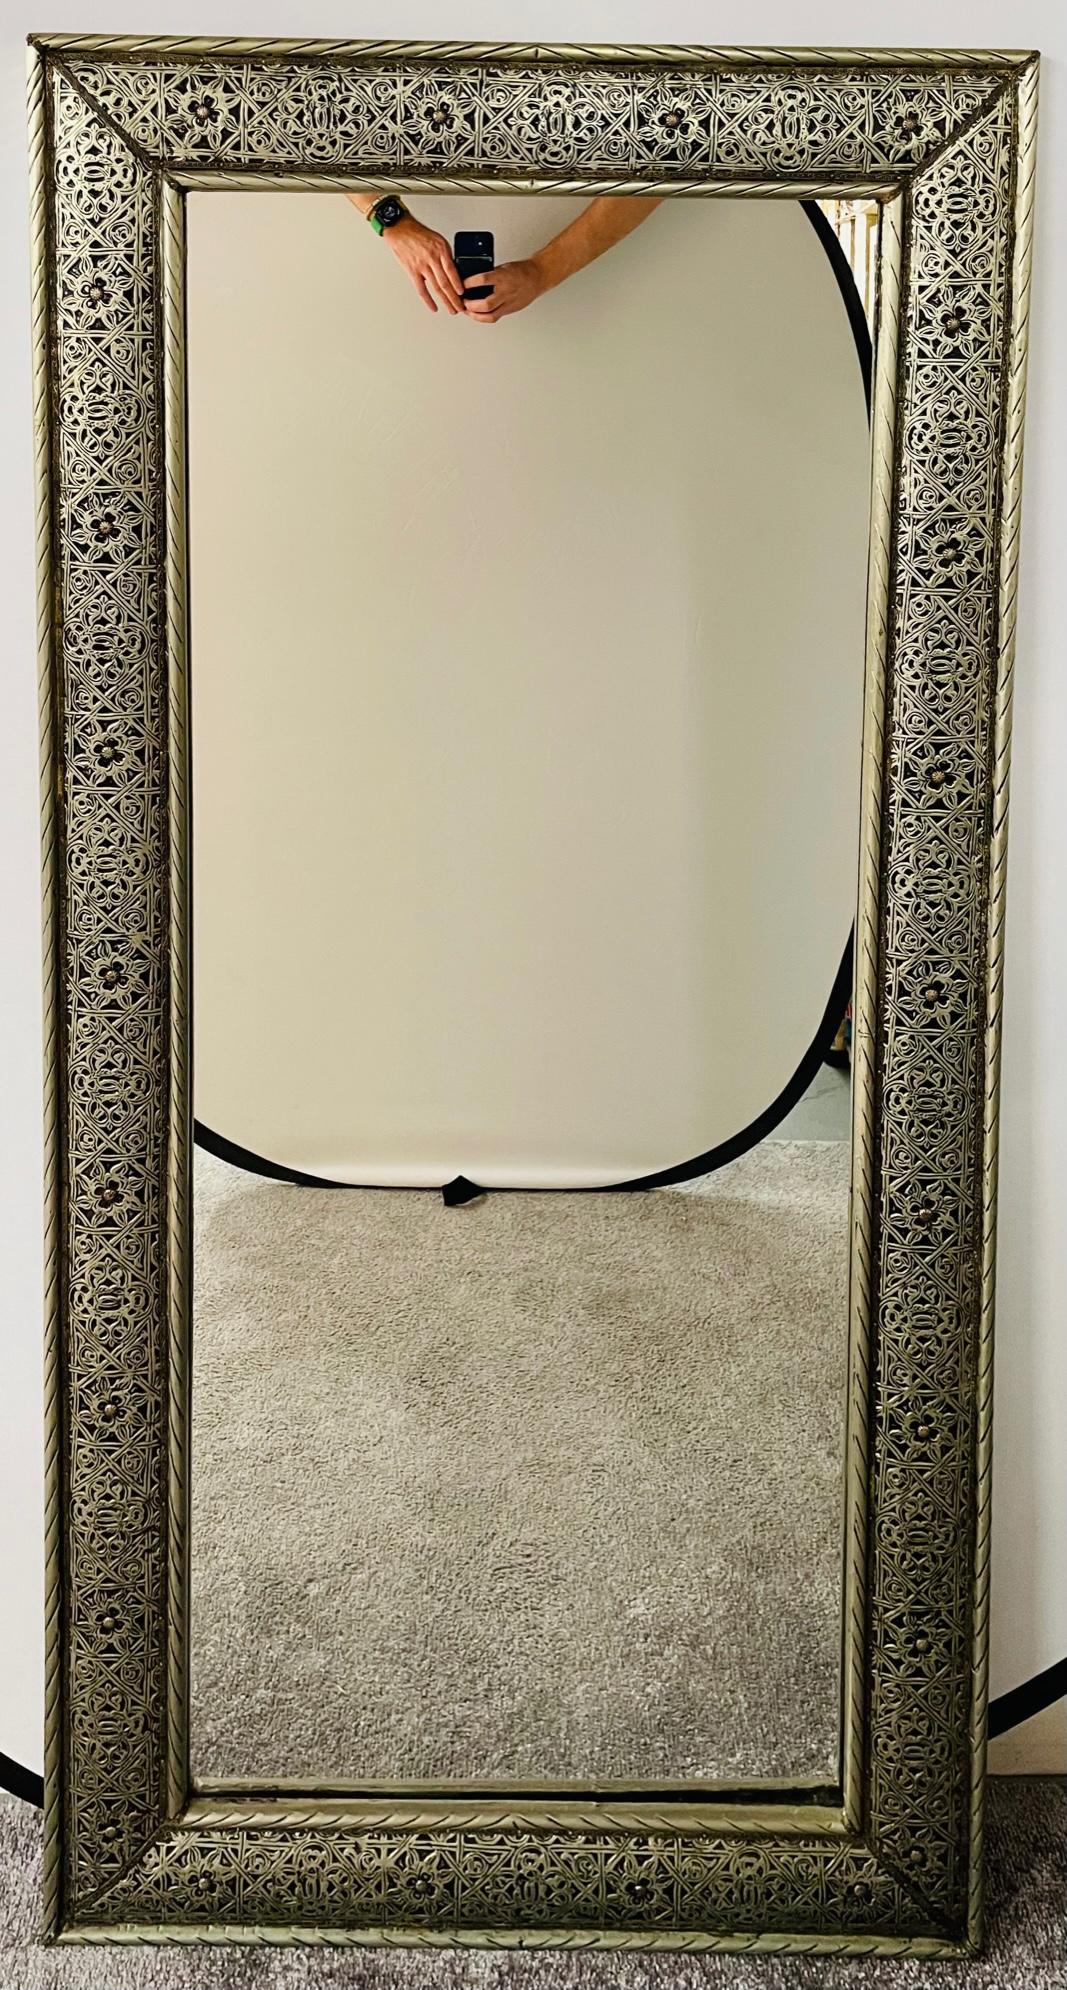 An elegant large Hollywood Regency style wall mirror finely handmade Moroccan filigree motif in a silvered metal tone. The mirror features a brass inlay and floral design and can be displayed both on the wall or on the floor. This one of a kind